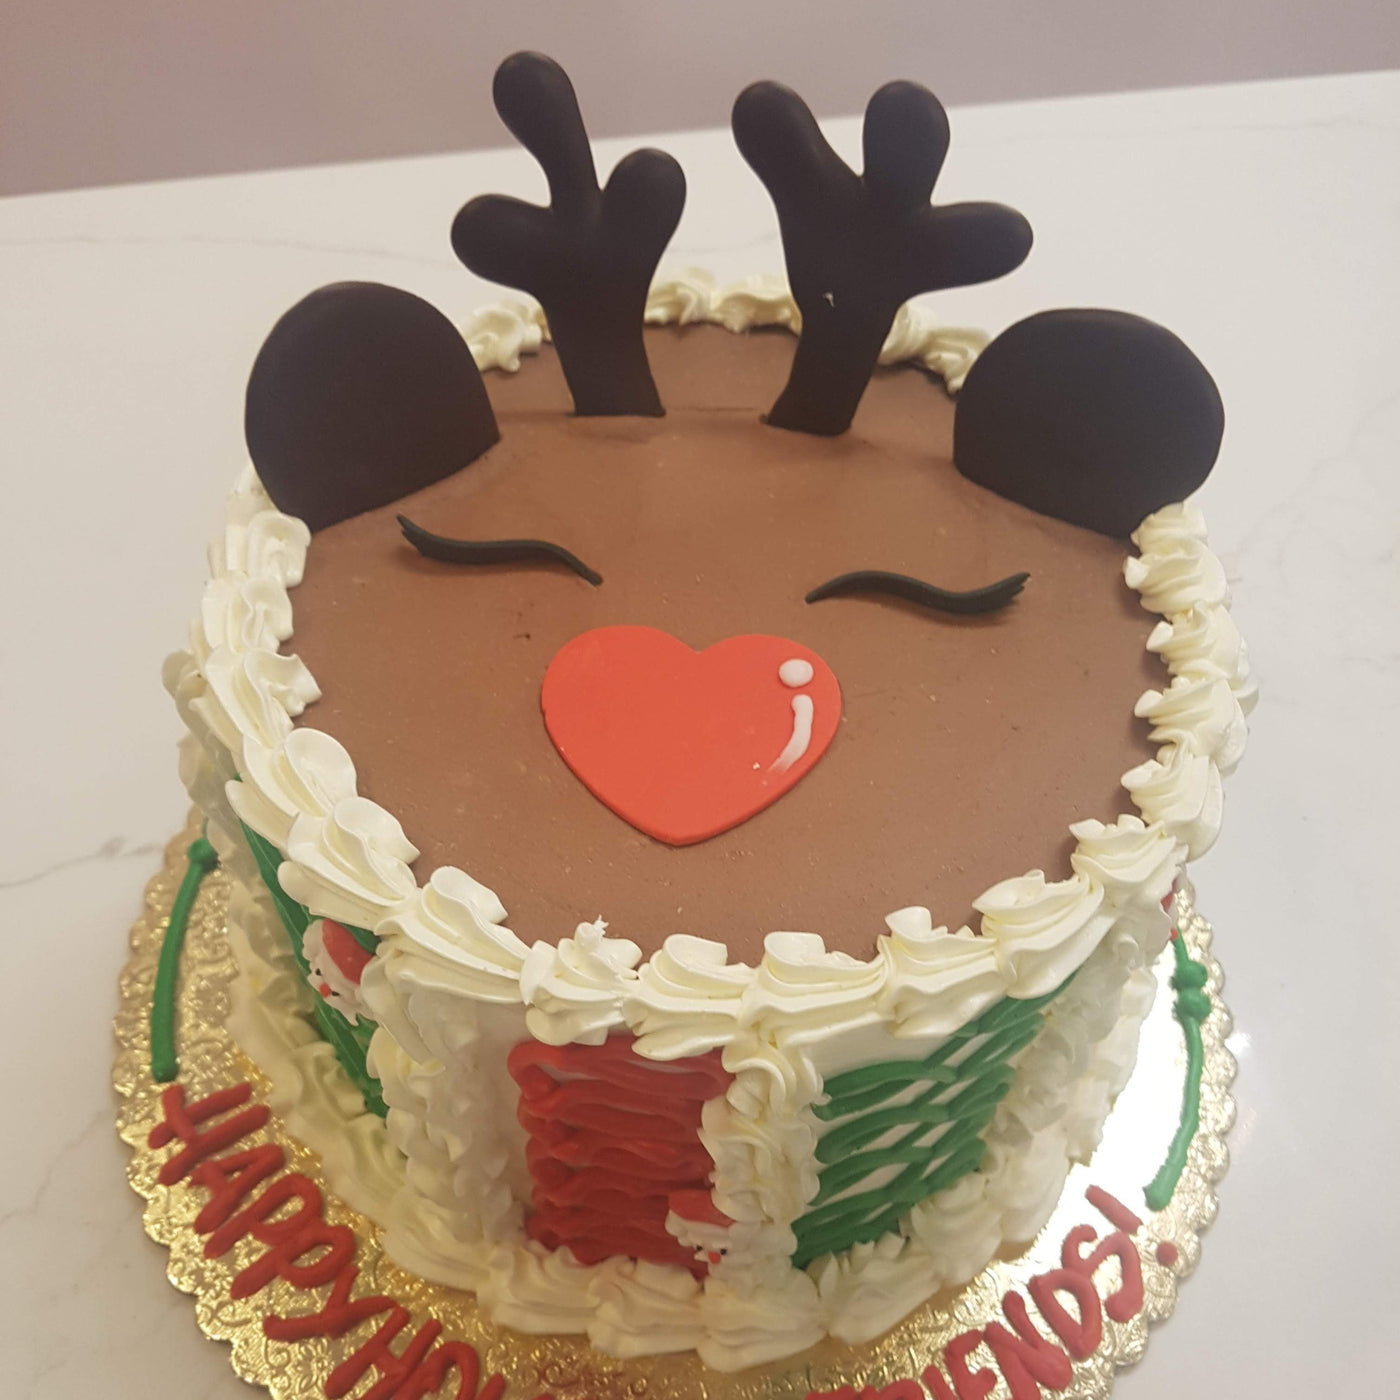 Rudolph the red nose reindeer cake, holiday office party, merry christmas, holiday party cake, non-denominational cake, festive holiday